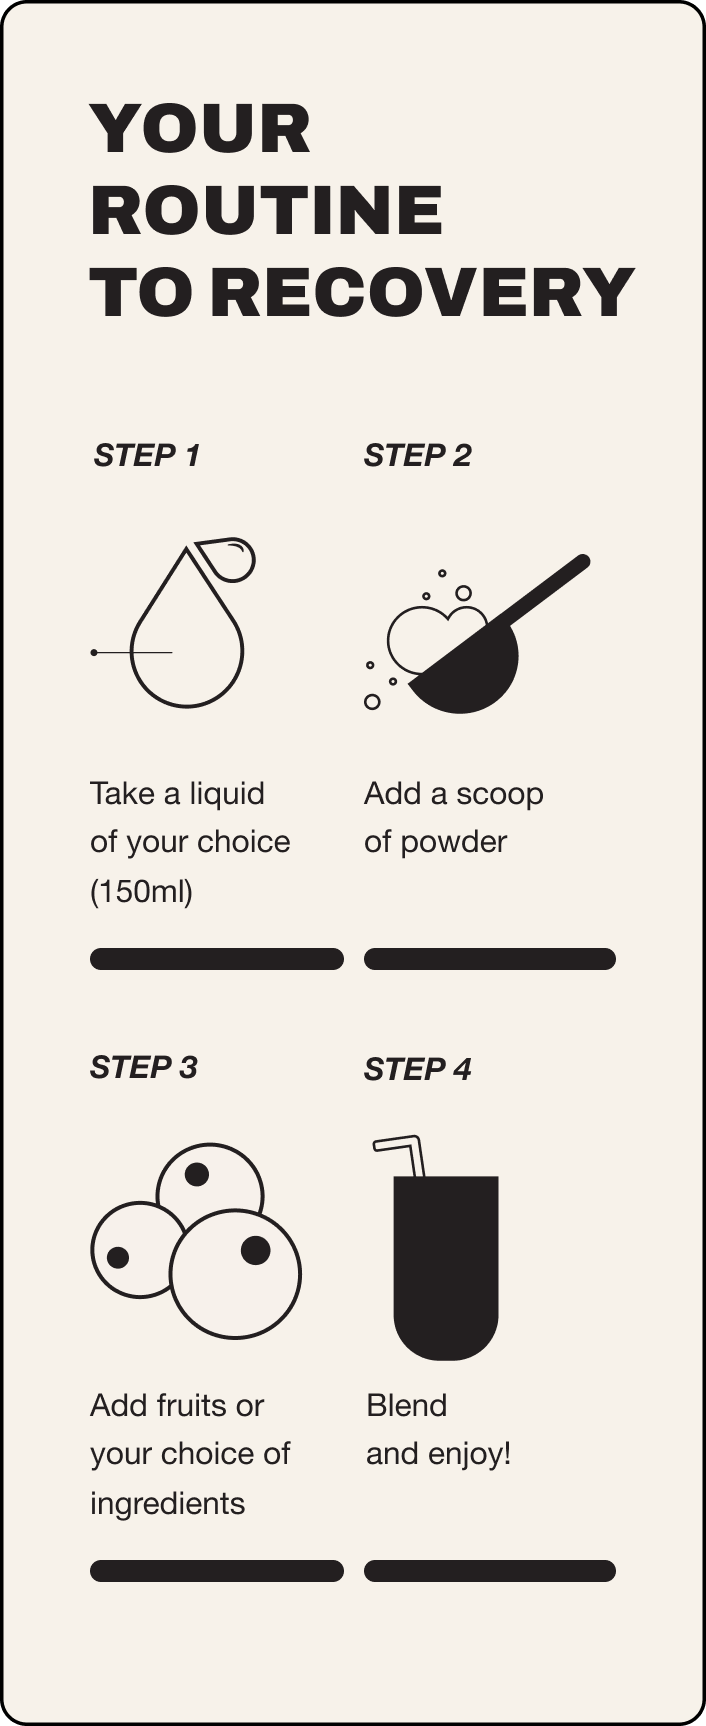 Your guide to recovery. Step 1 take a liquid of your choice 150ml, step 2 add a scoop of powder, step 3 add fruits or your choice of ingredients, step 4 blend and enjoy!